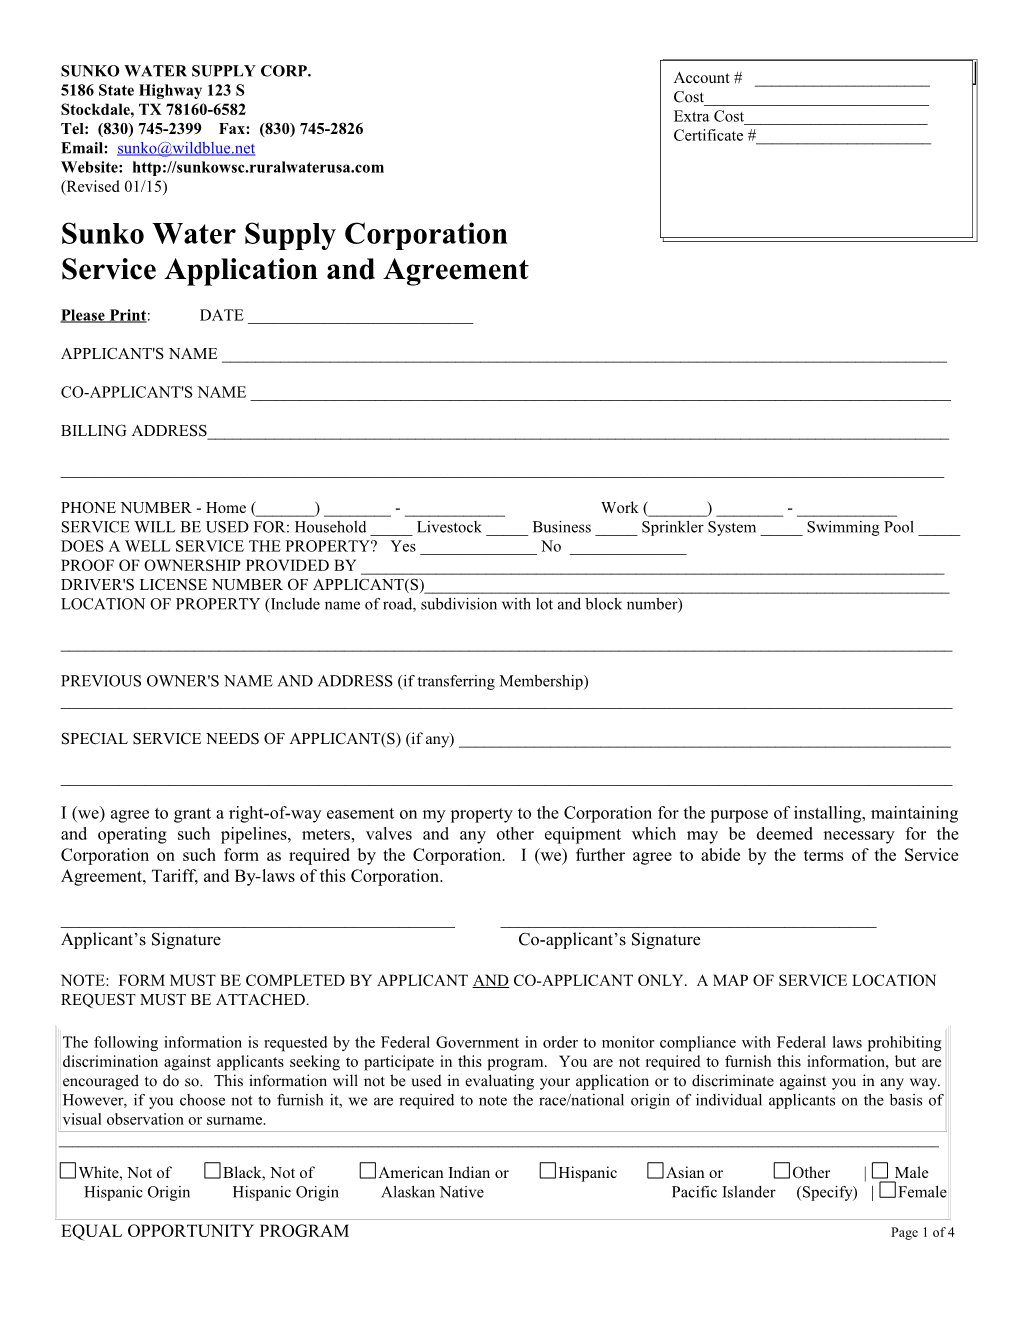 USDA Form RD TX 1942 11 (8/96)	CORPORATION USE ONLY